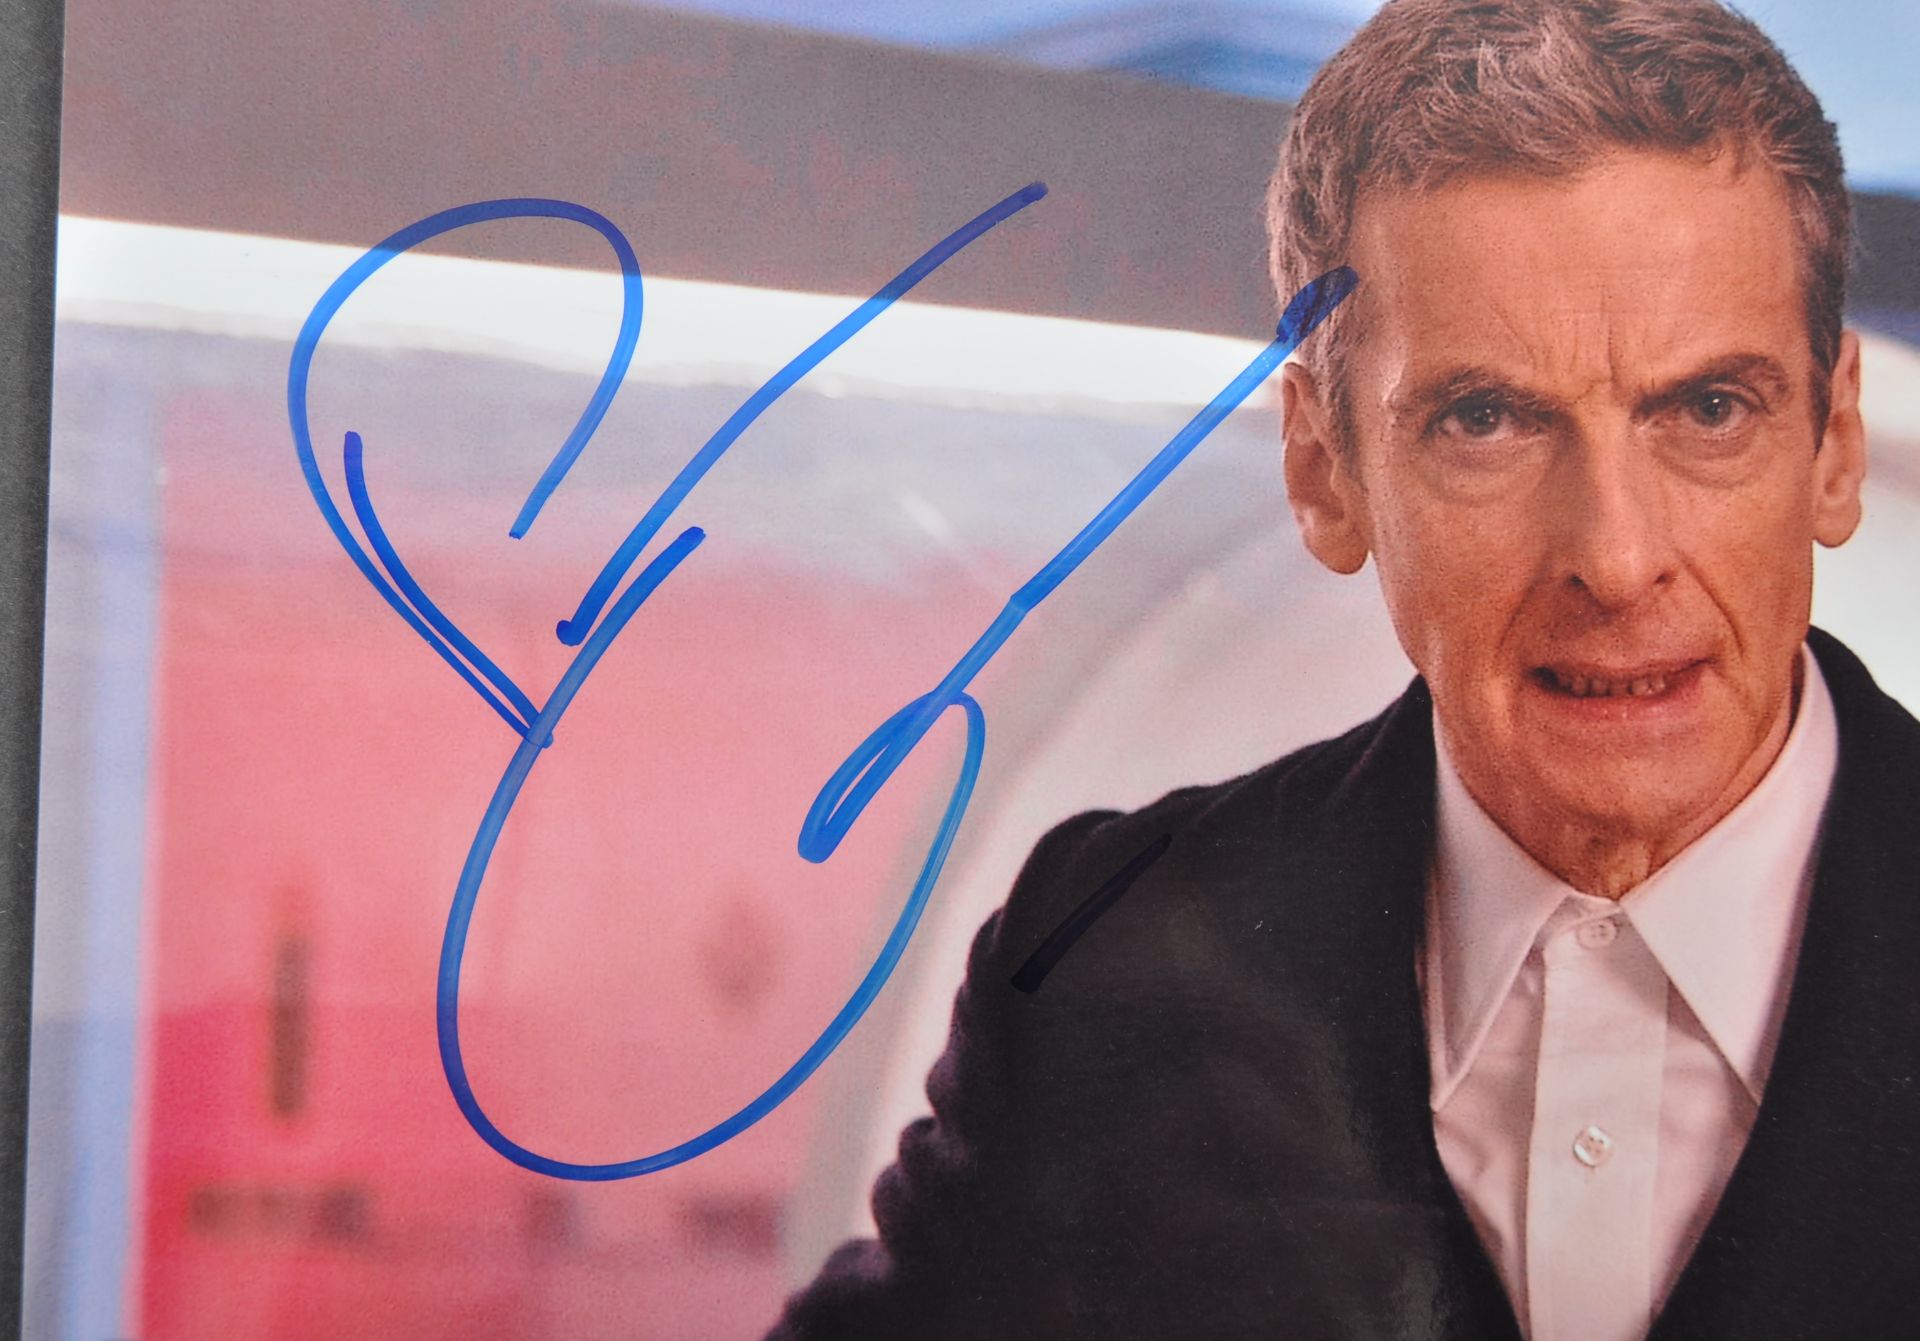 DOCTOR WHO - PETER CAPALDI - AUTOGRAPHED PHOTOGRAPH - Image 2 of 2